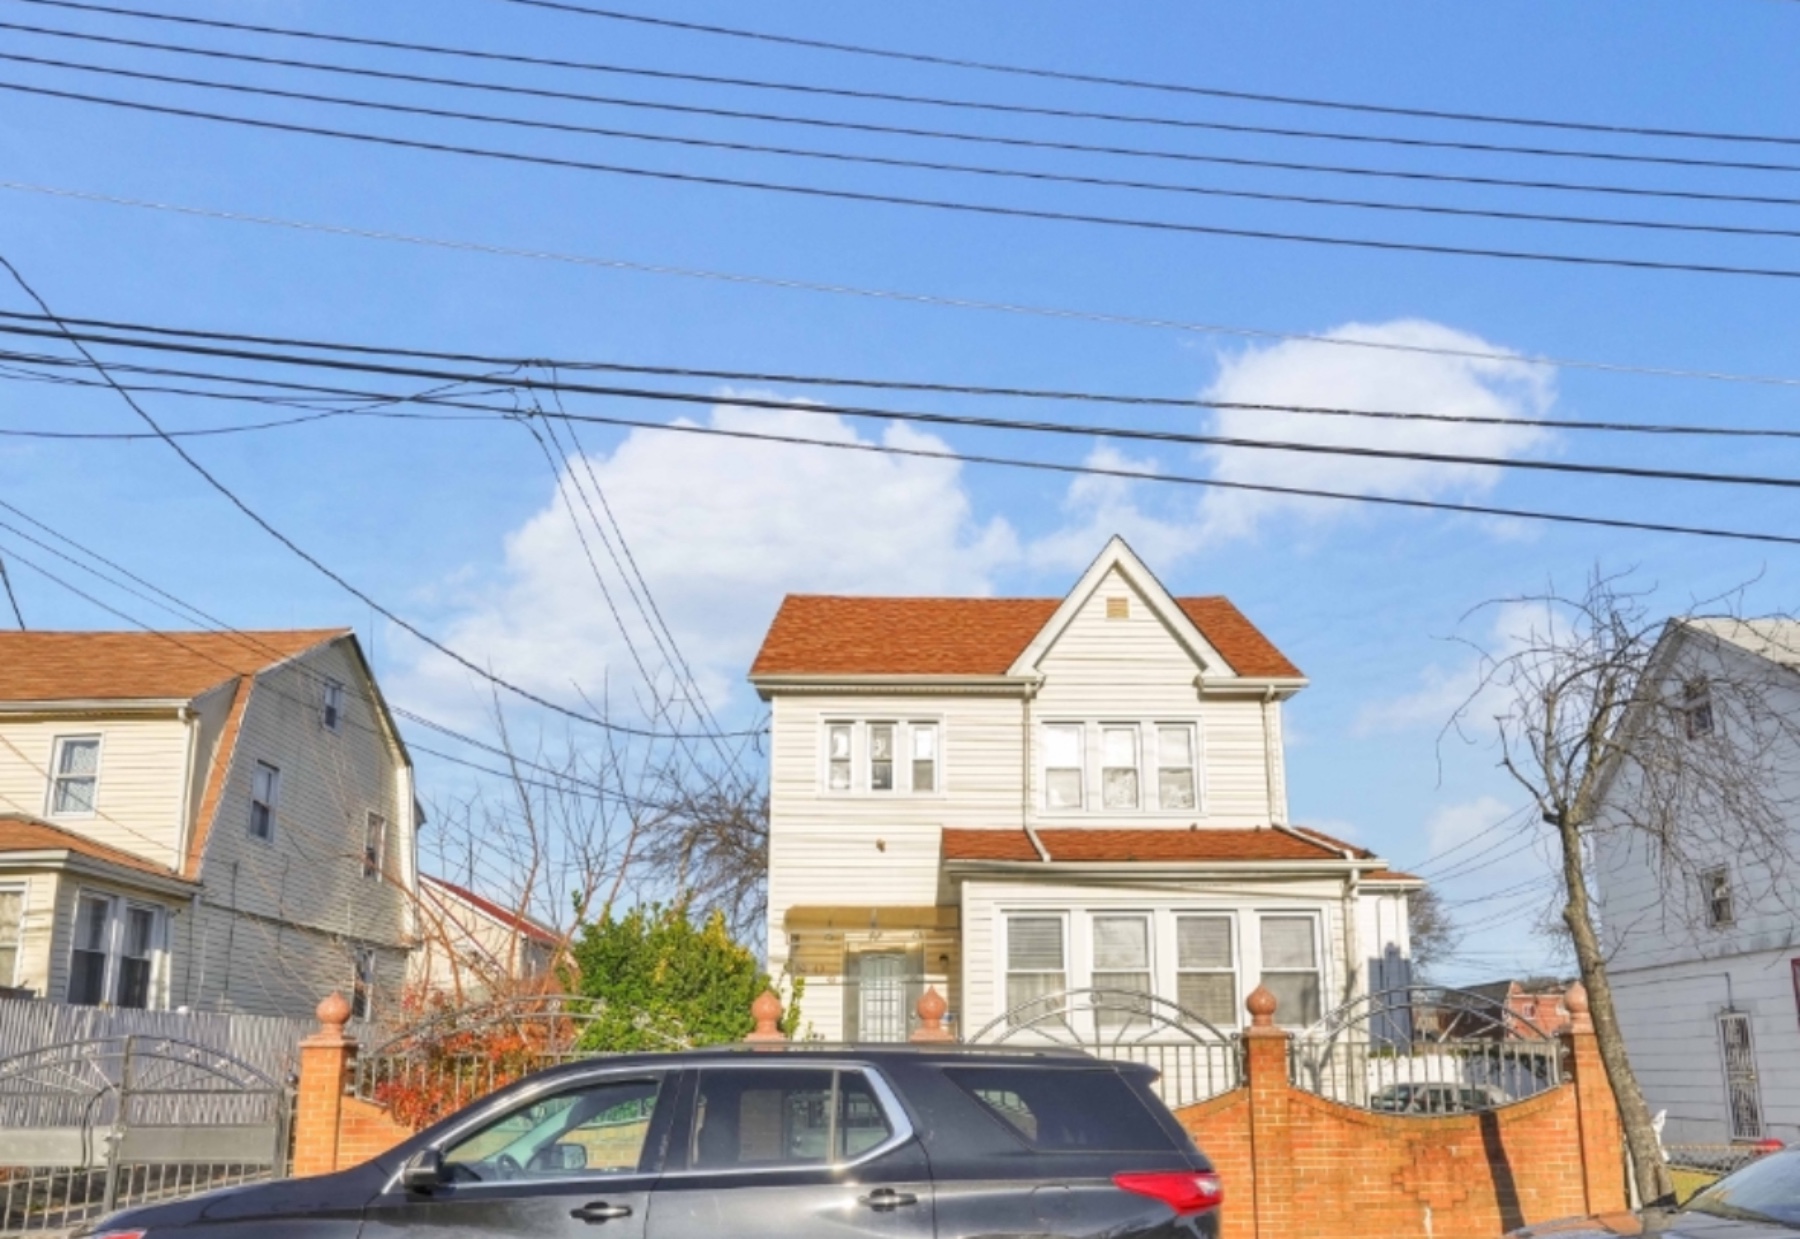 150-43 114th Road, South Jamaica, Queens, New York - 4 Bedrooms  
2.5 Bathrooms  
9 Rooms - 